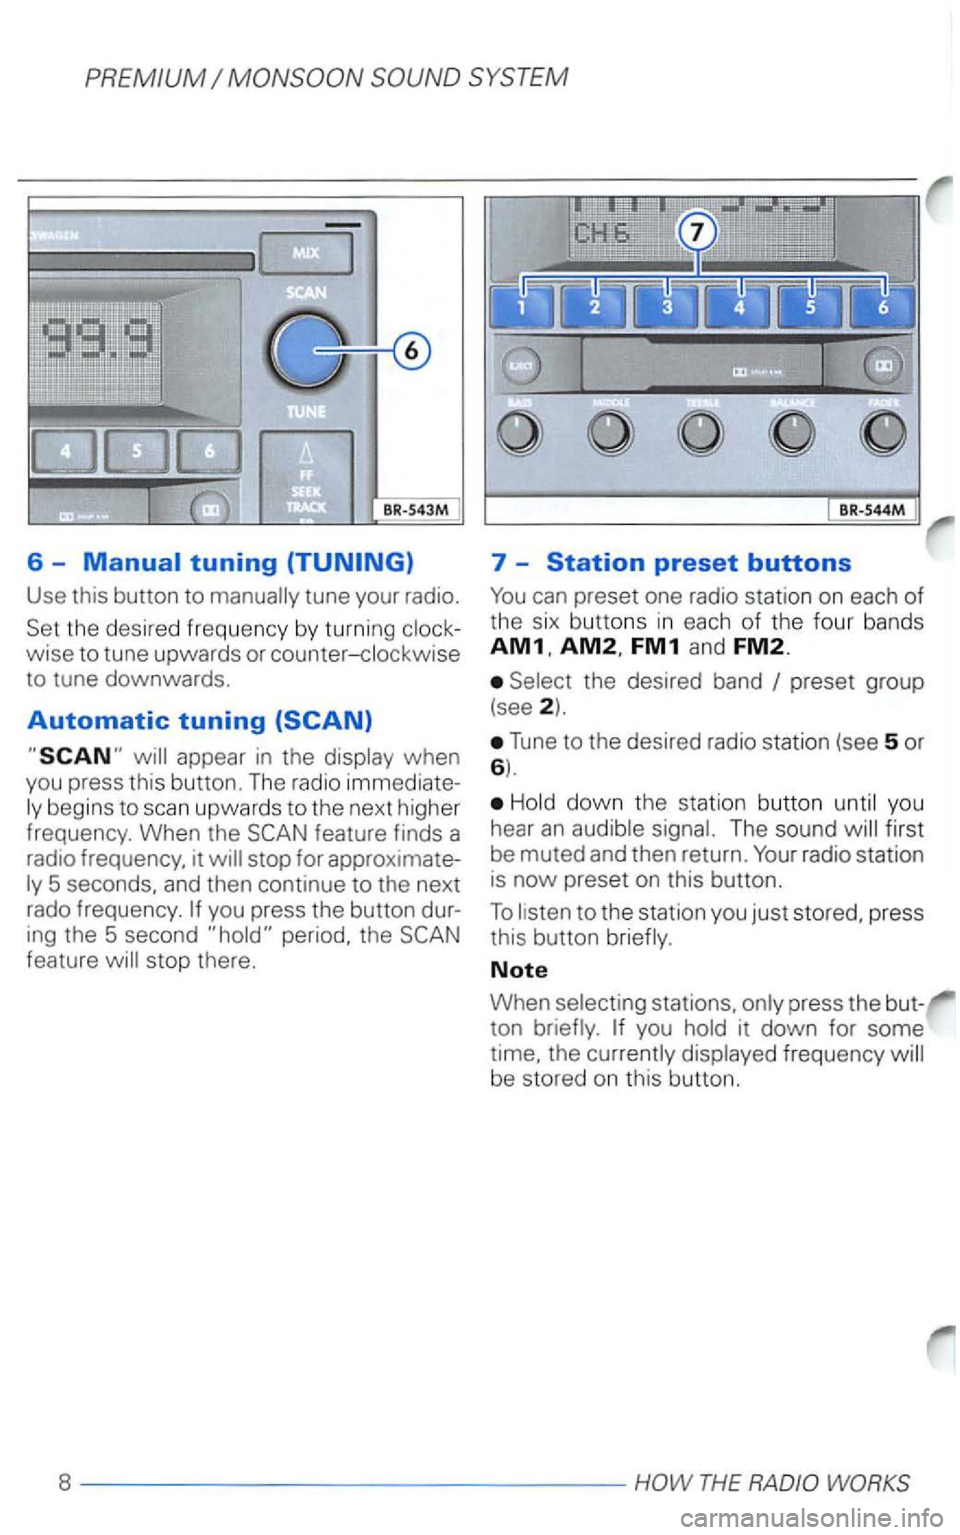 VOLKSWAGEN PASSAT 2003  Owners Manual 6 -
Use  this button  to tune your radio. 
wise to tune  upwards  or counter-clockwise 
to  tune  downwards . 
Automatic tuning (SCAN) 
appear in the when 
you  press  this button.  The radio 
begins 